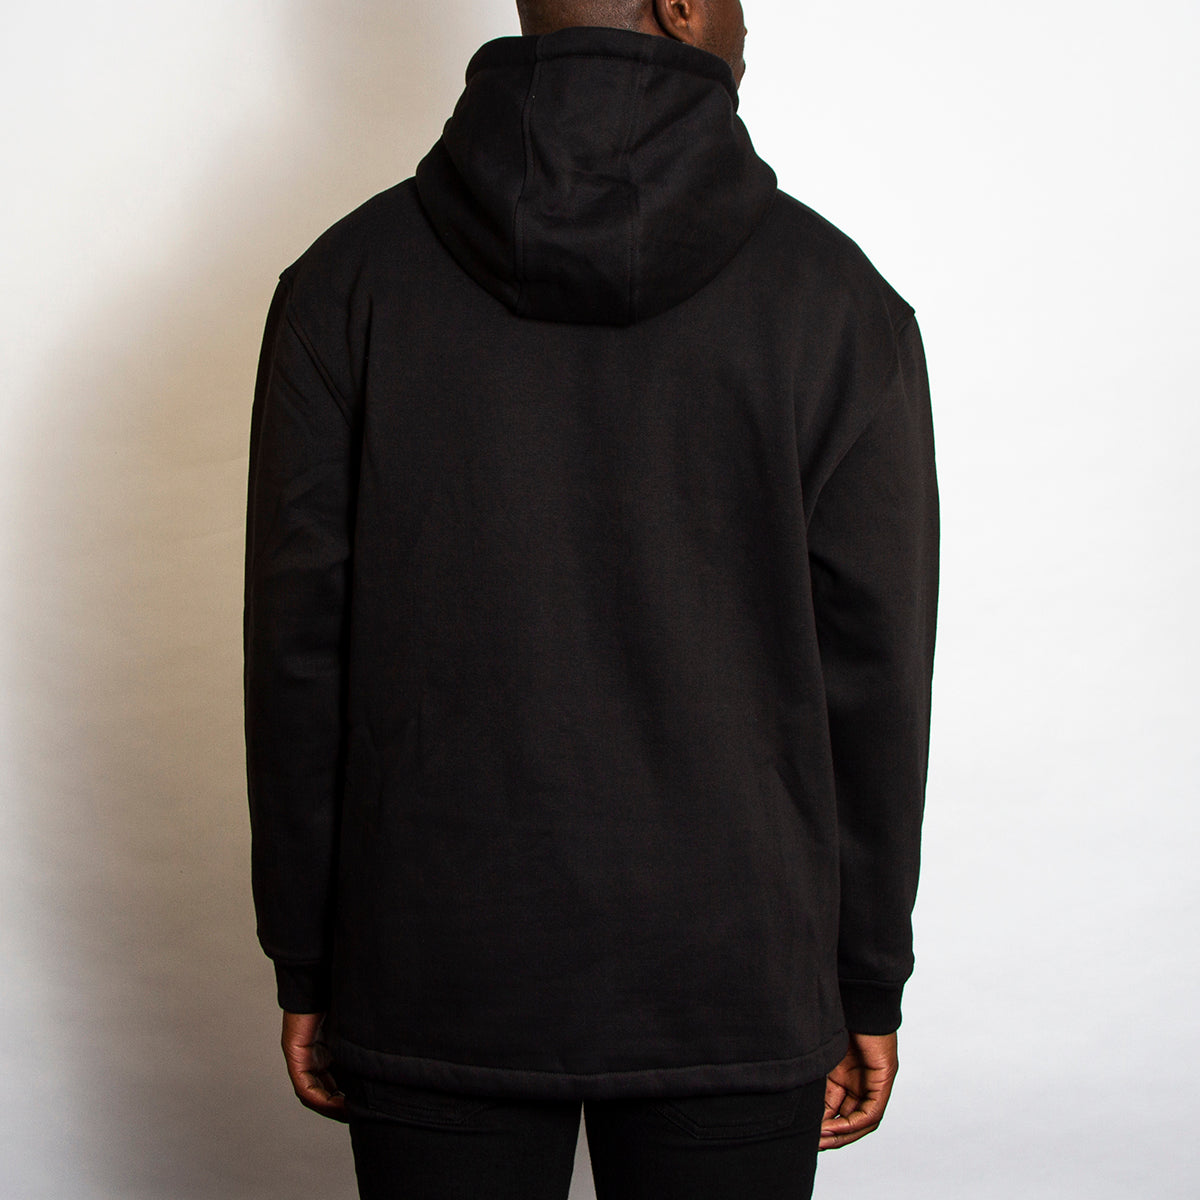 Acid Letter - 3/4 Zipped Pullover Hood - Black - Wasted Heroes